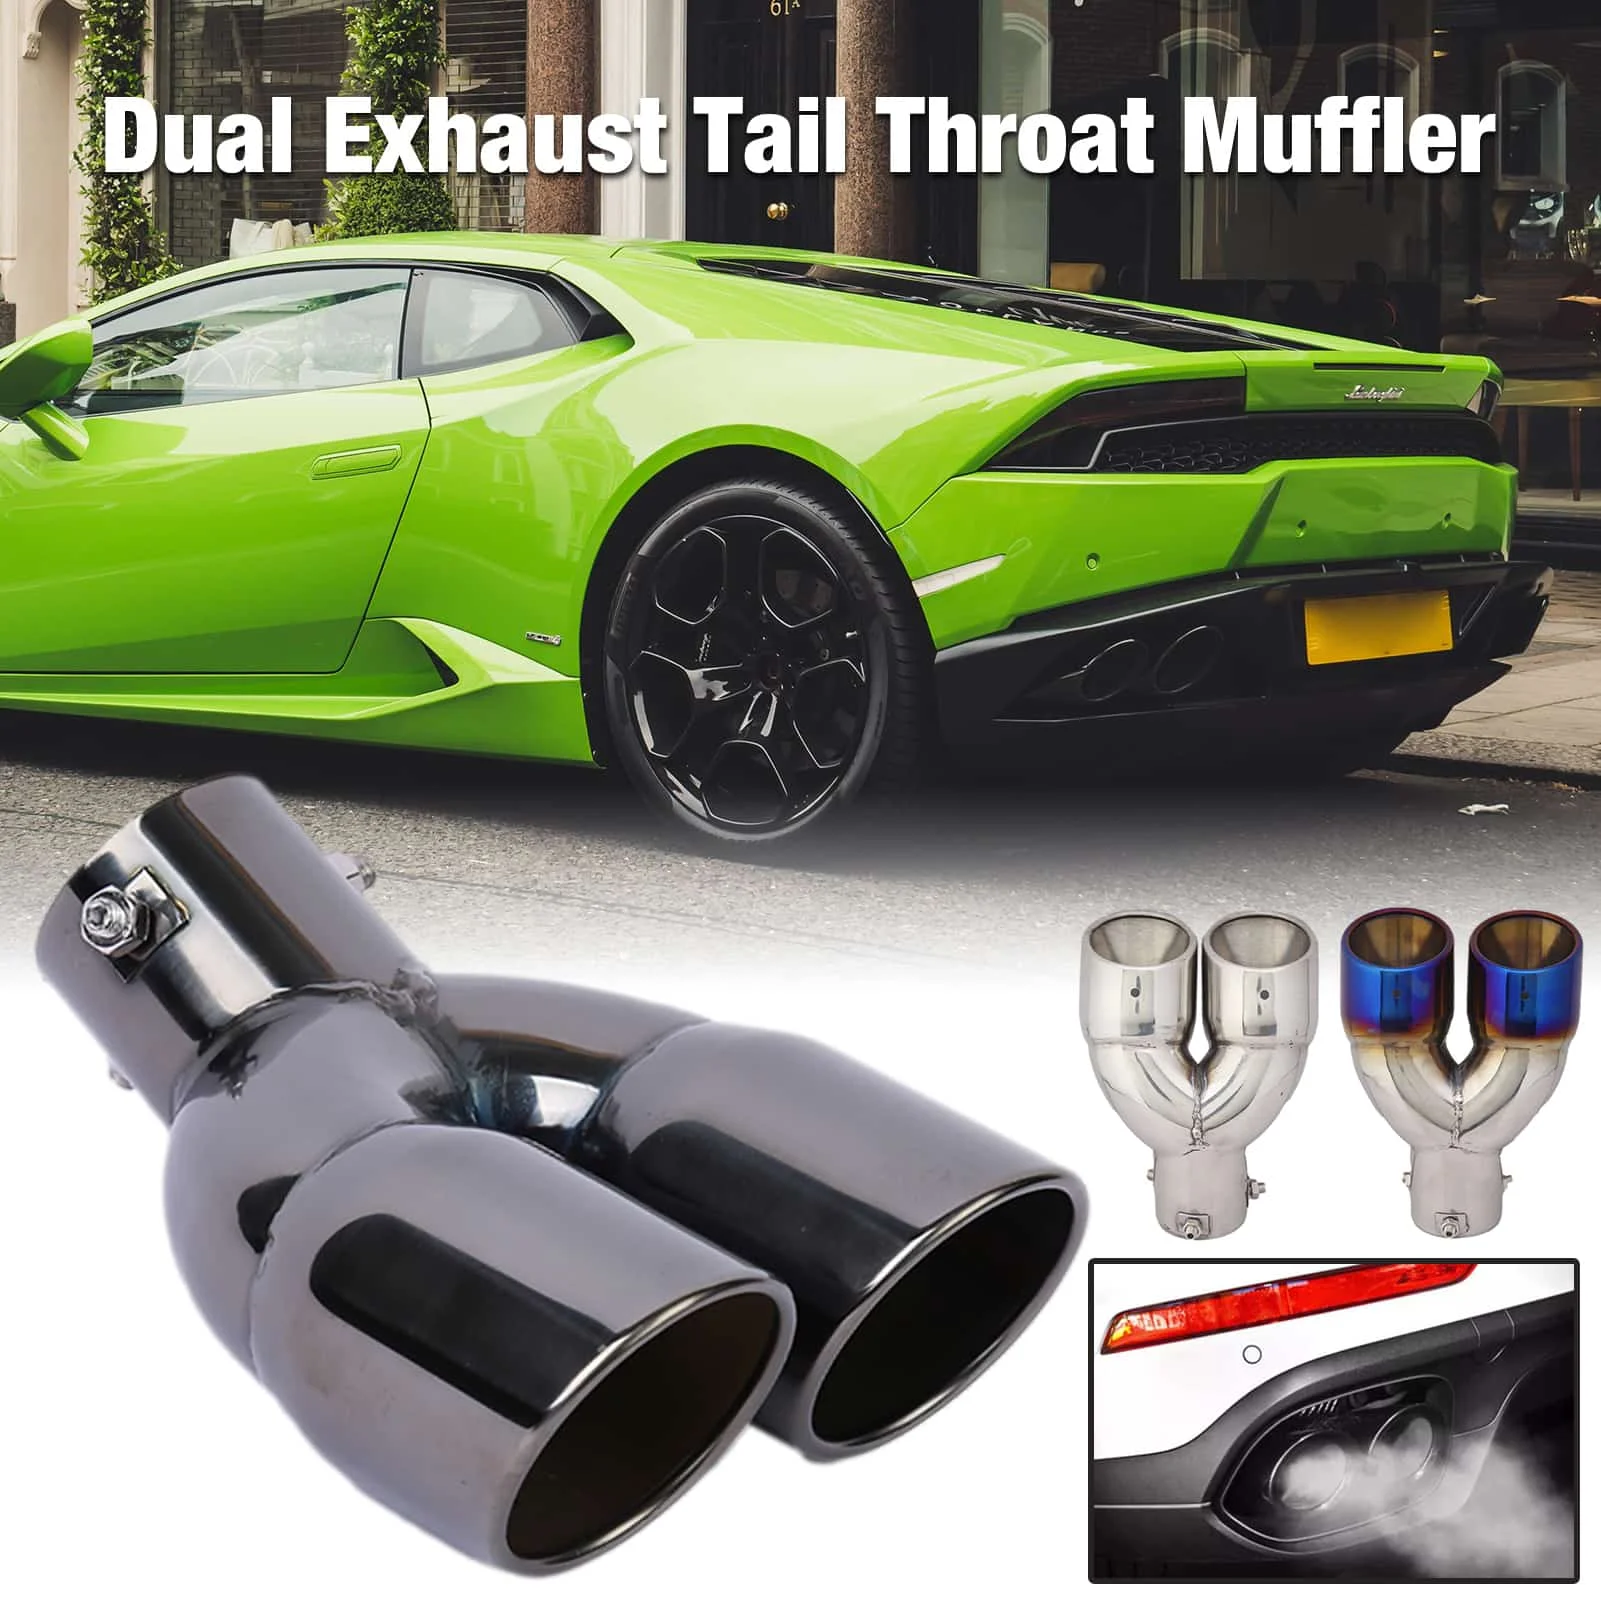 

63mm Double Outlet Stainless Steel Chrome Car Muffler Exhaust Pipe Tip End Trim Modified Tail Throat Car Liner Pipe Refined